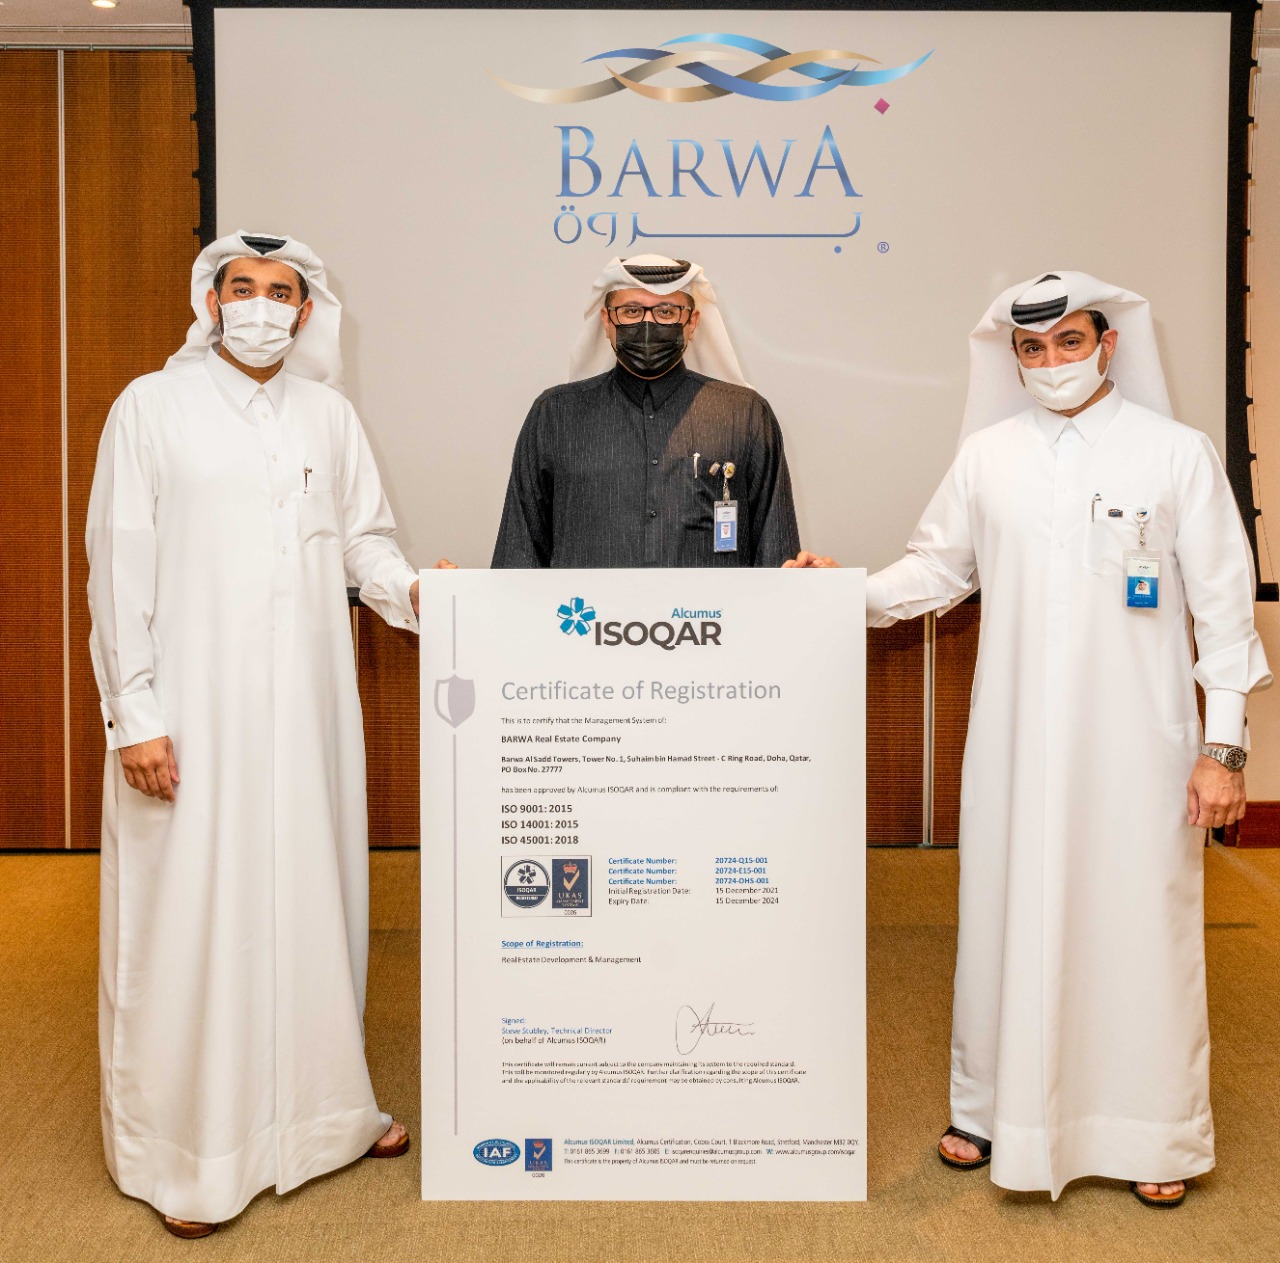 Barwa Real Estate Obtained 3 International Accreditation Certificates at Par with ISO 